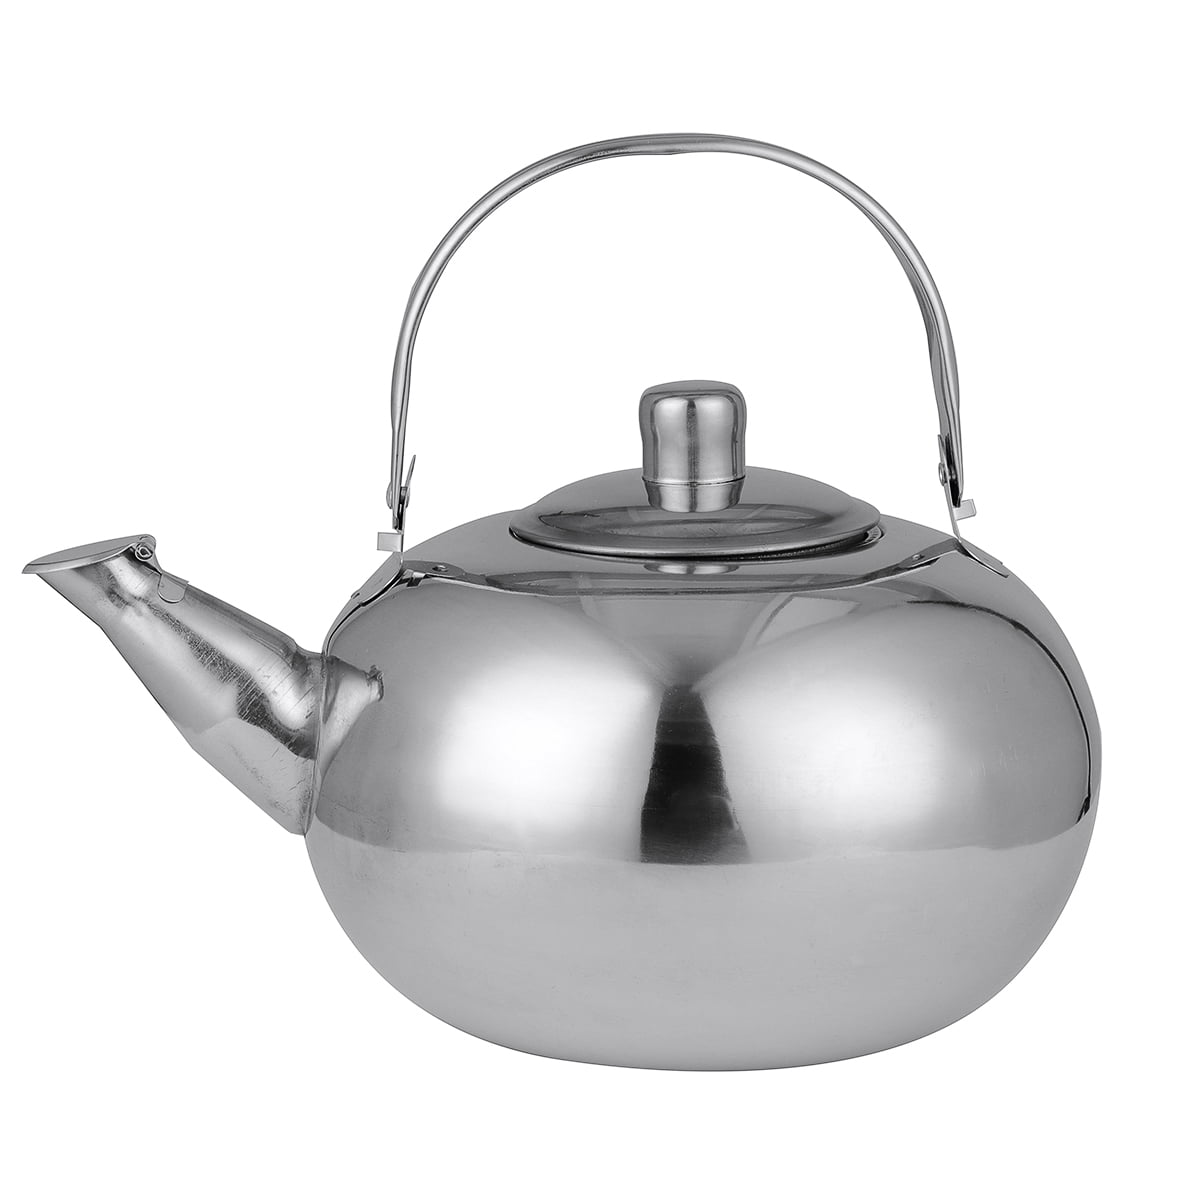 Silver Stainless Steel Teapot 1 piece 1.0/1.5/2.0/2.5L Coffee Pot Sale Newest